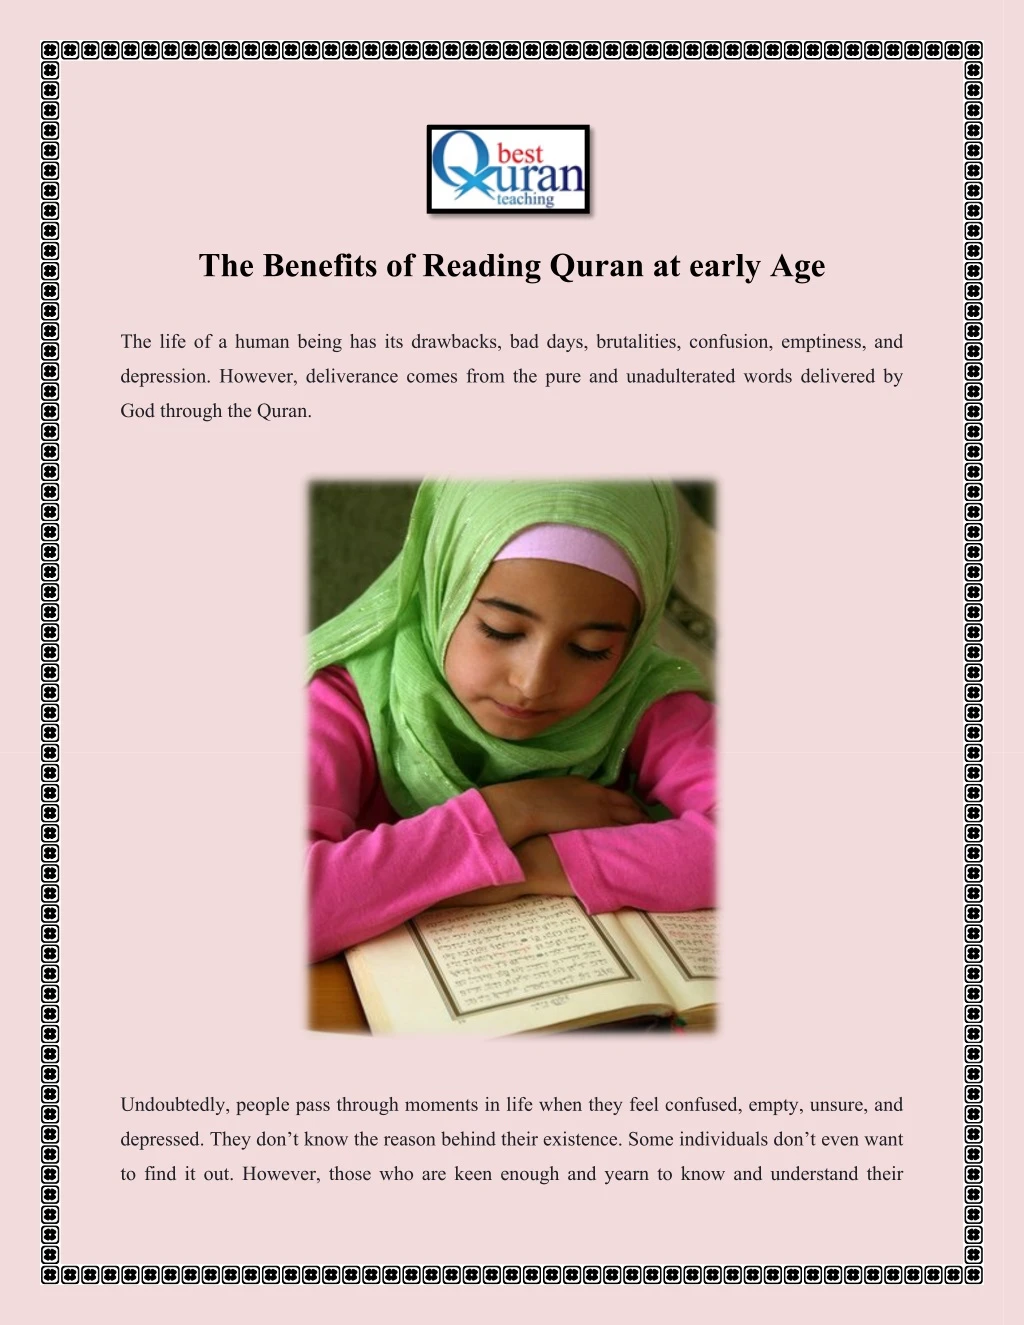 the benefits of reading quran at early age